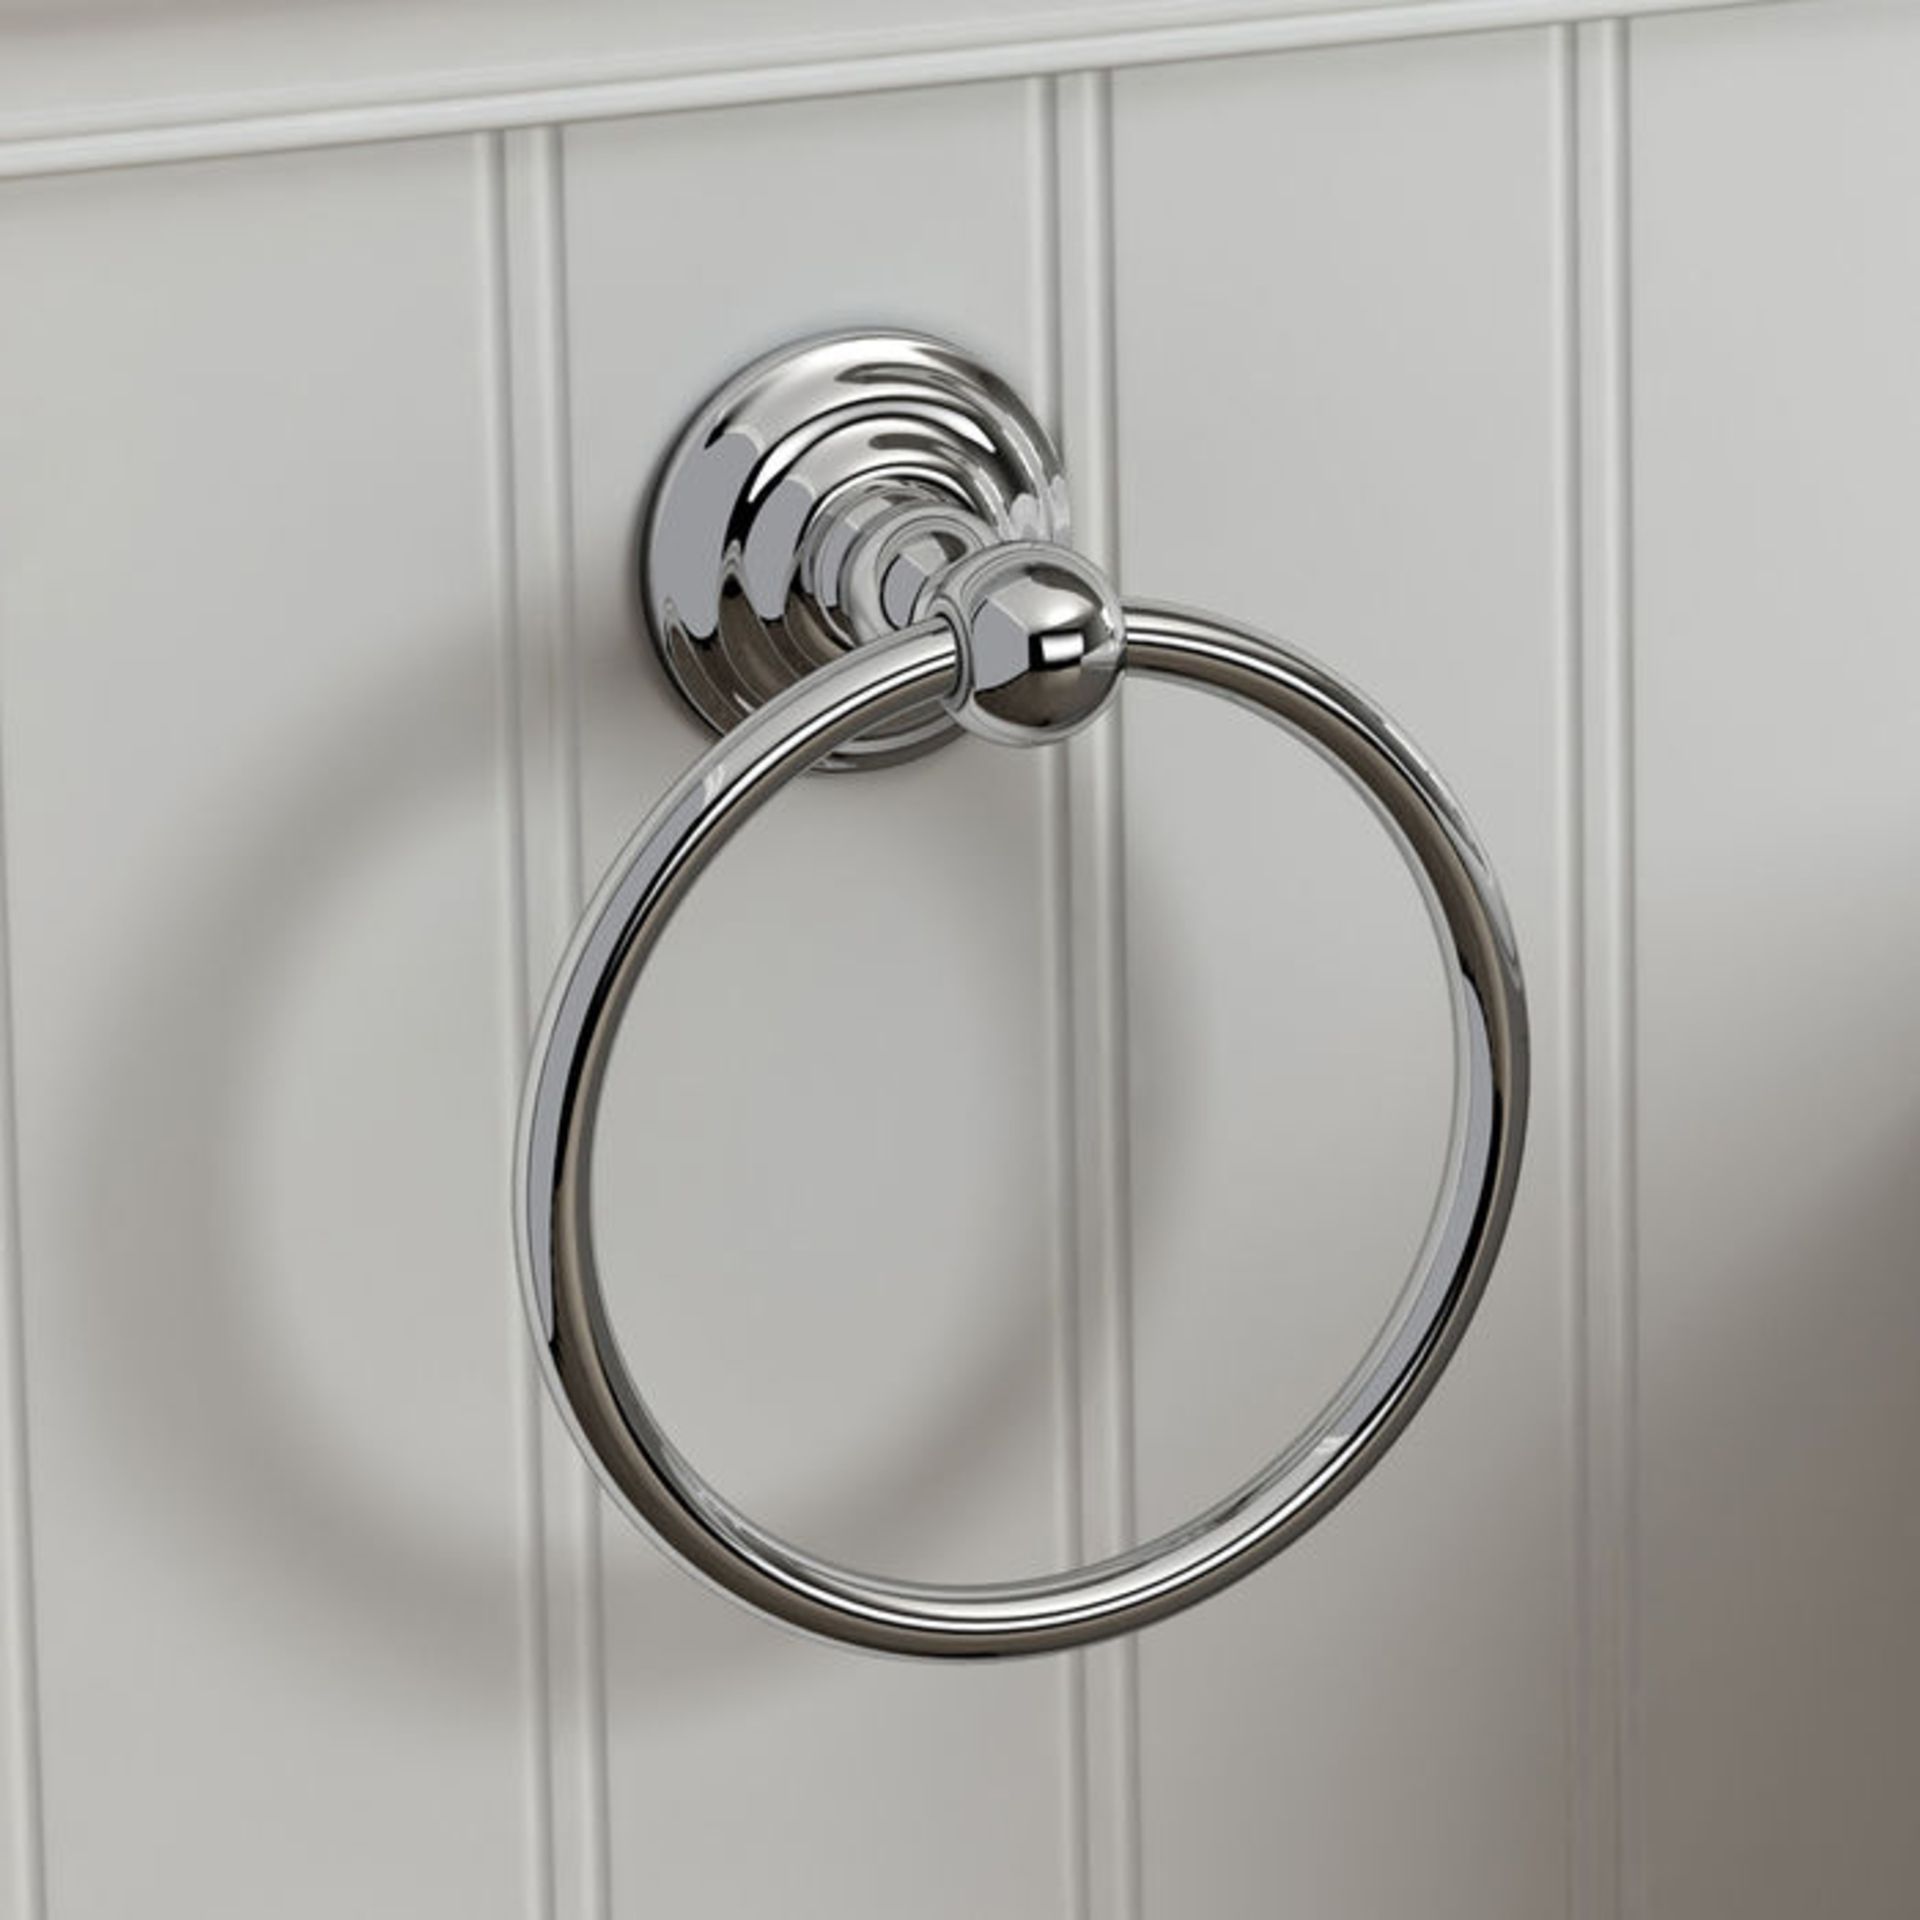 NEW (NK71) Jesmond Toilet Roll Holder Finishes your bathroom with a little extra functionality...